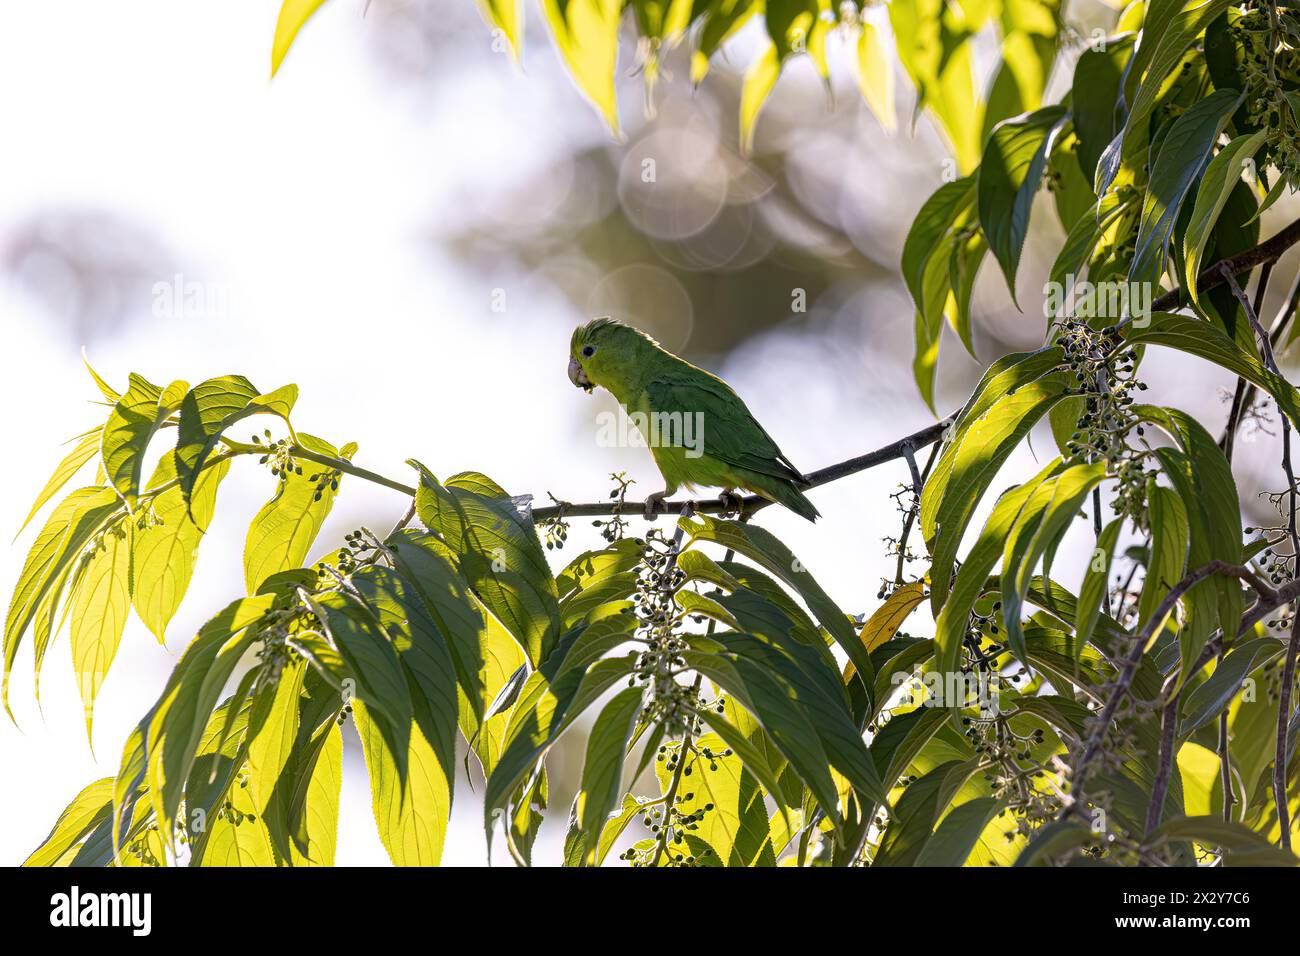 Animal Female Cobalt rumped Parrotlet Bird of the species Forpus xanthopterygius Stock Photo